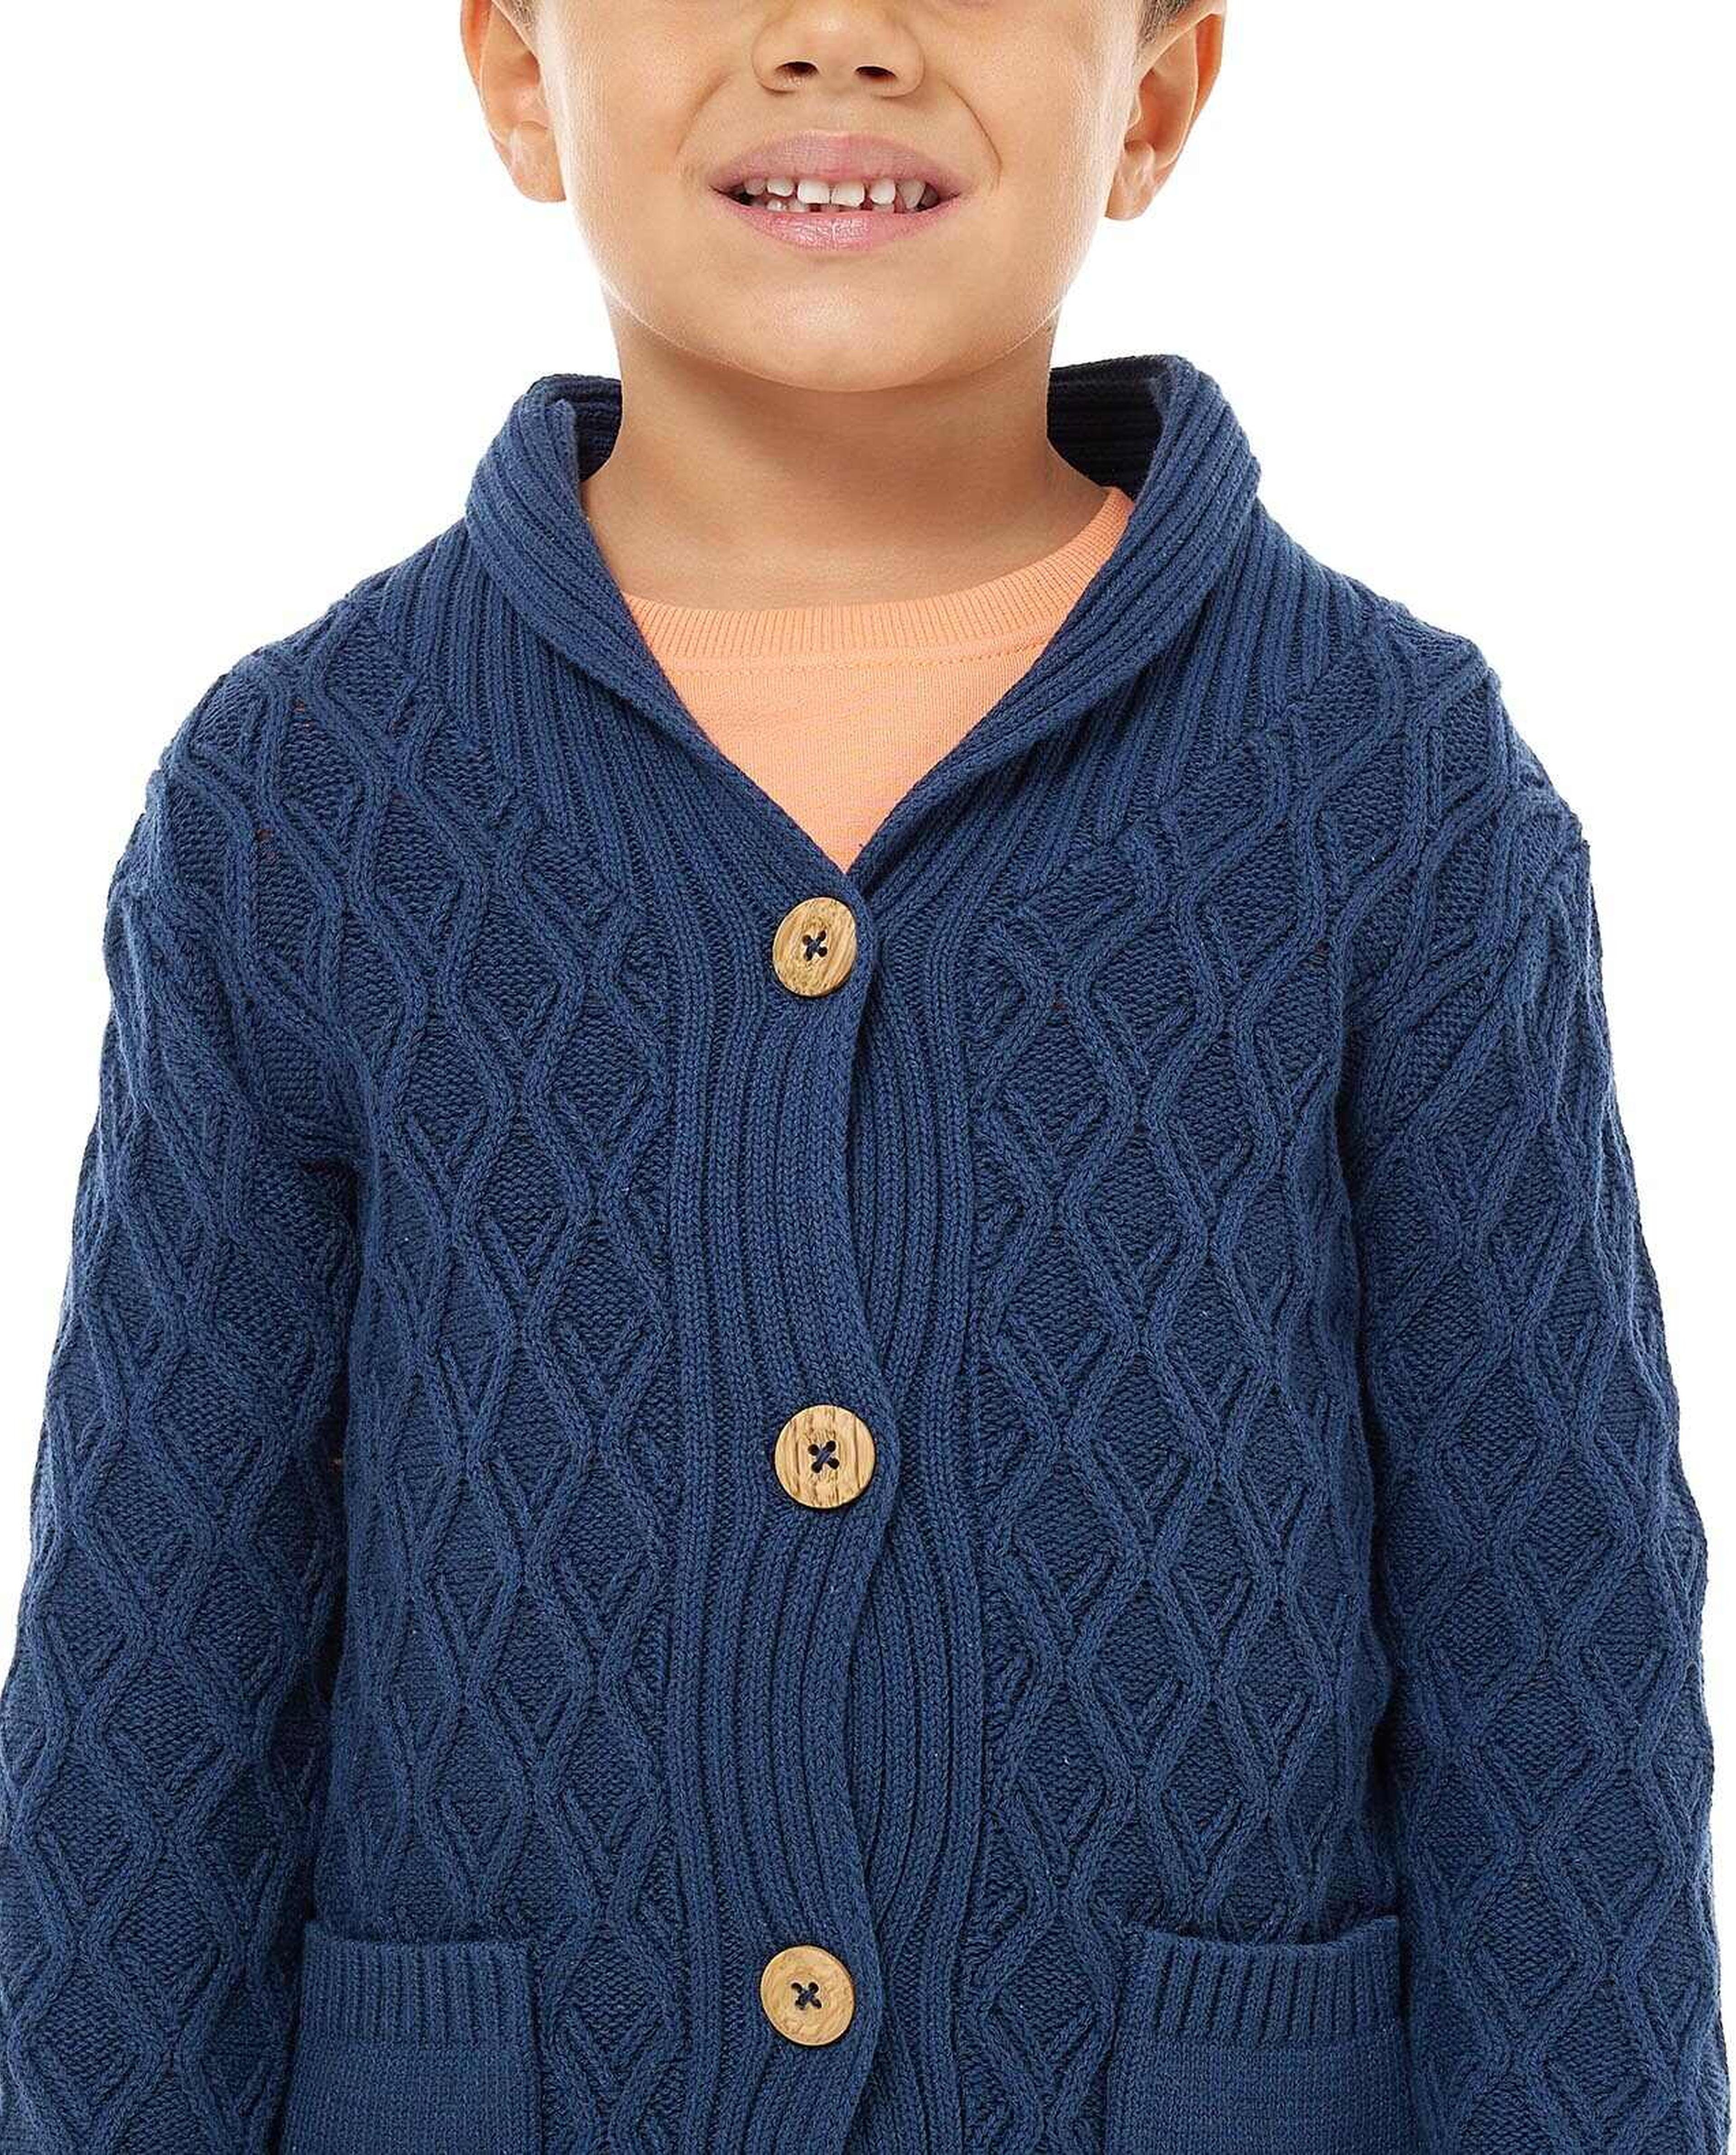 Patterned Cardigan with Crew Neck and Long Sleeves